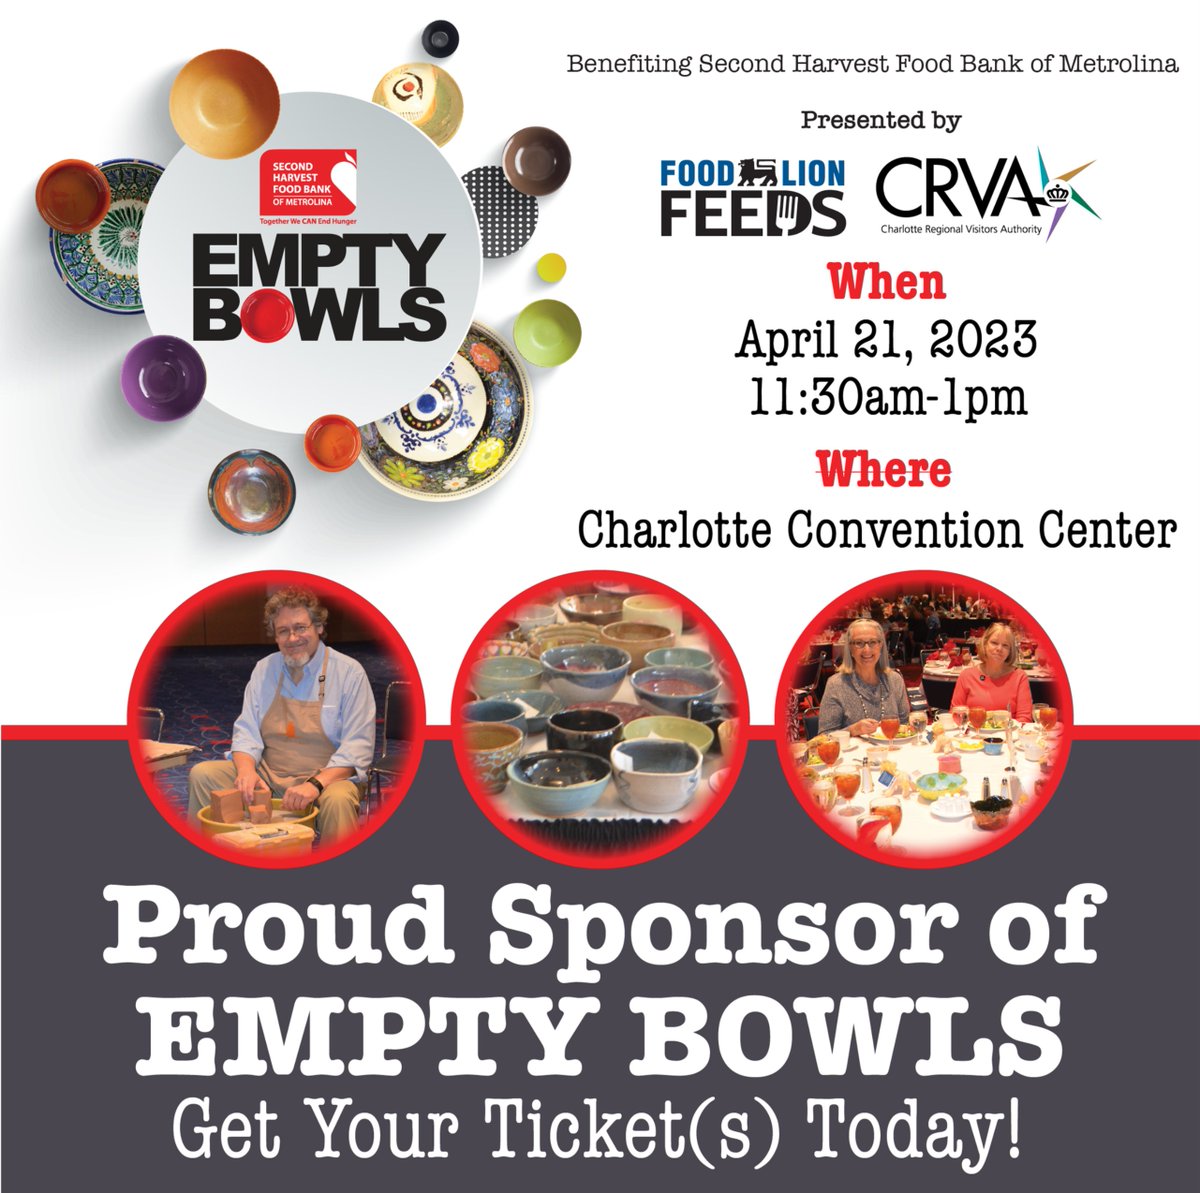 Food Lion is a proud sponsor of the 2023 Empty Bowls presented by #FoodLionFeeds & the #CRVA on April 21, 11:30am-1pm at the Charlotte Convention Center. Visit the following link for event info: food-lion.co/3K4JNFO. #shmetrolina #EmptyBowlsSponsor